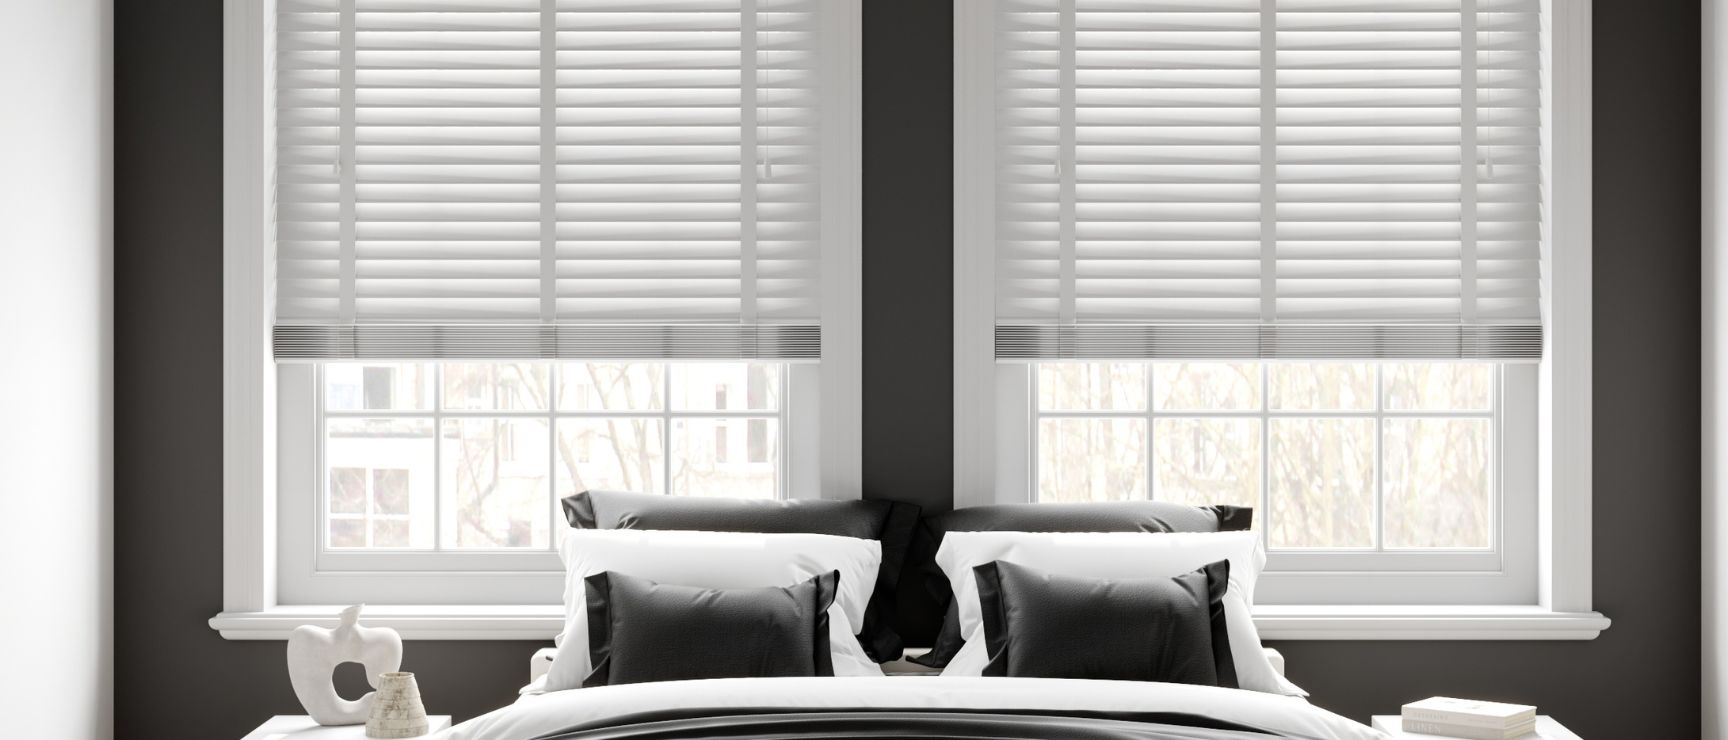 Wooden Blinds will not lower